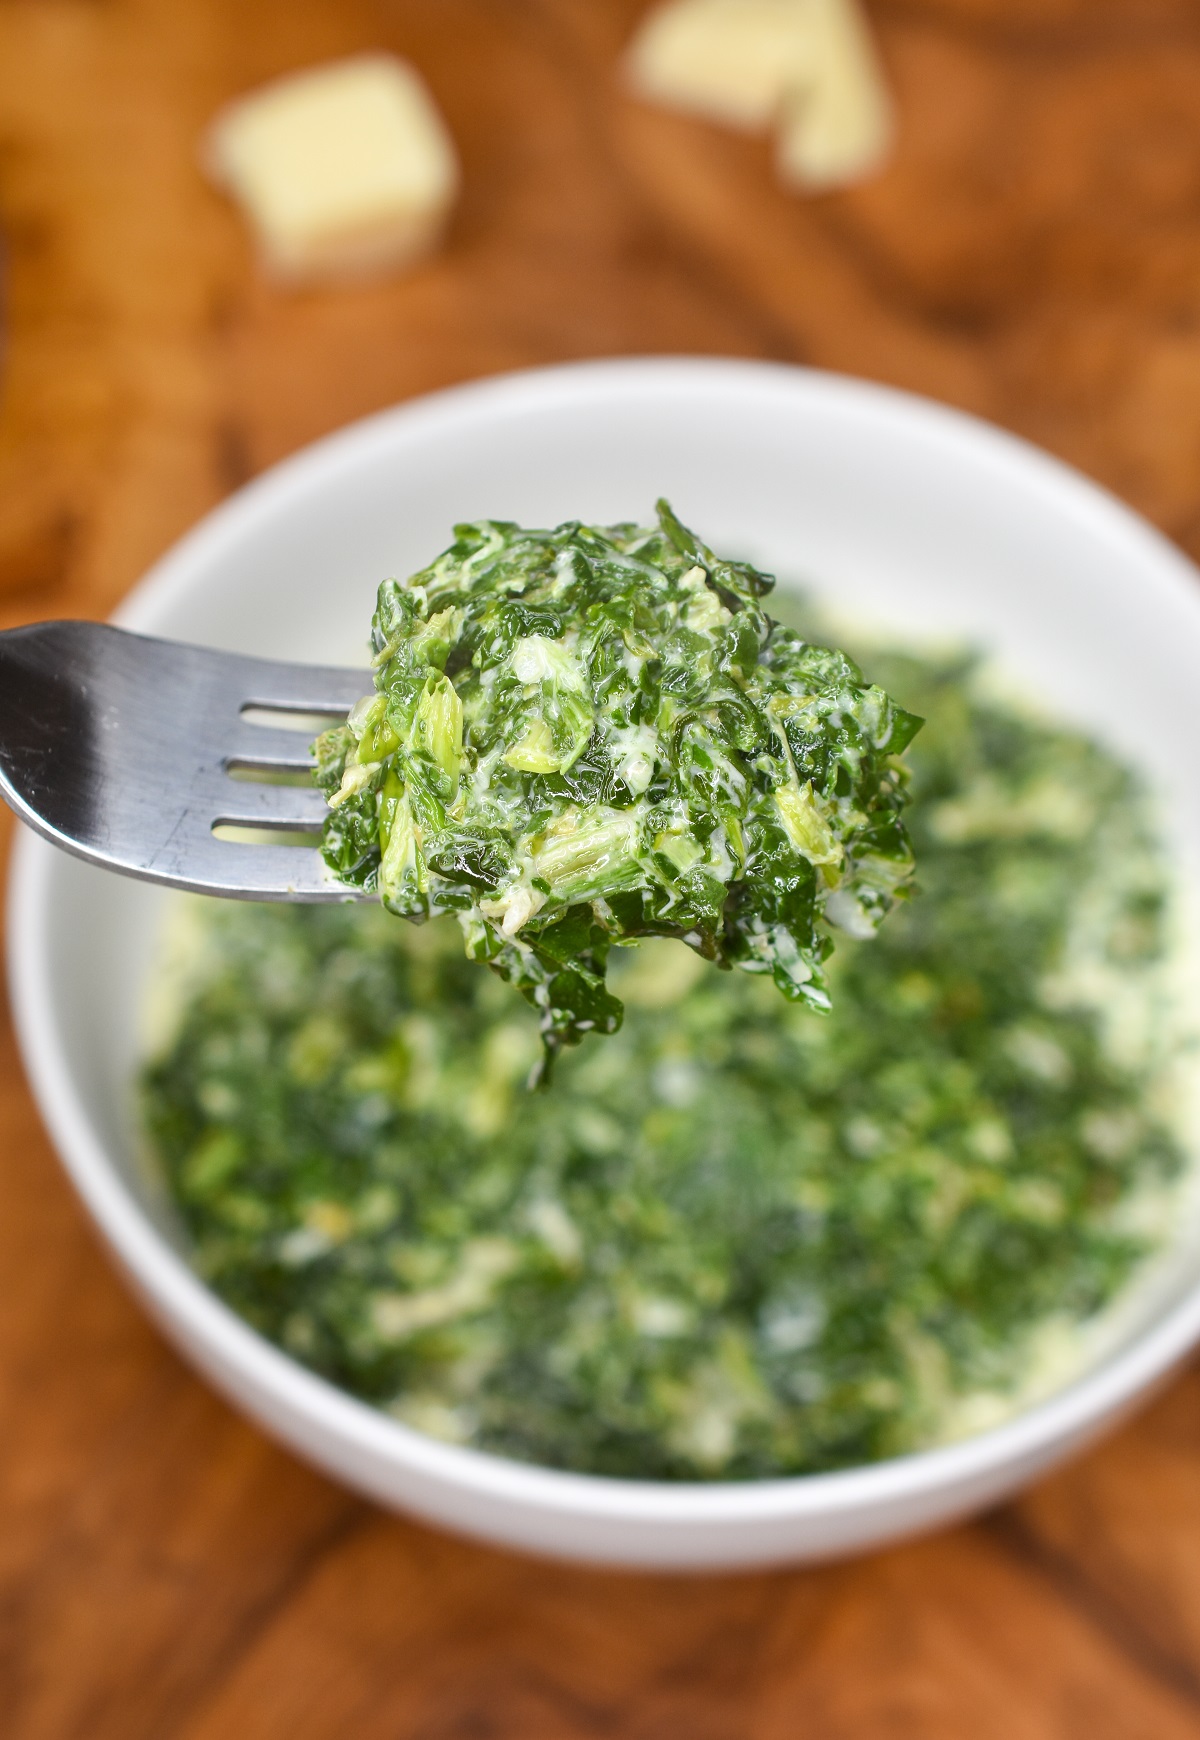 Steakhouse Creamed Spinach recipe
amazing flavor made with simple ingredients. Creamed spinach with frozen spinach